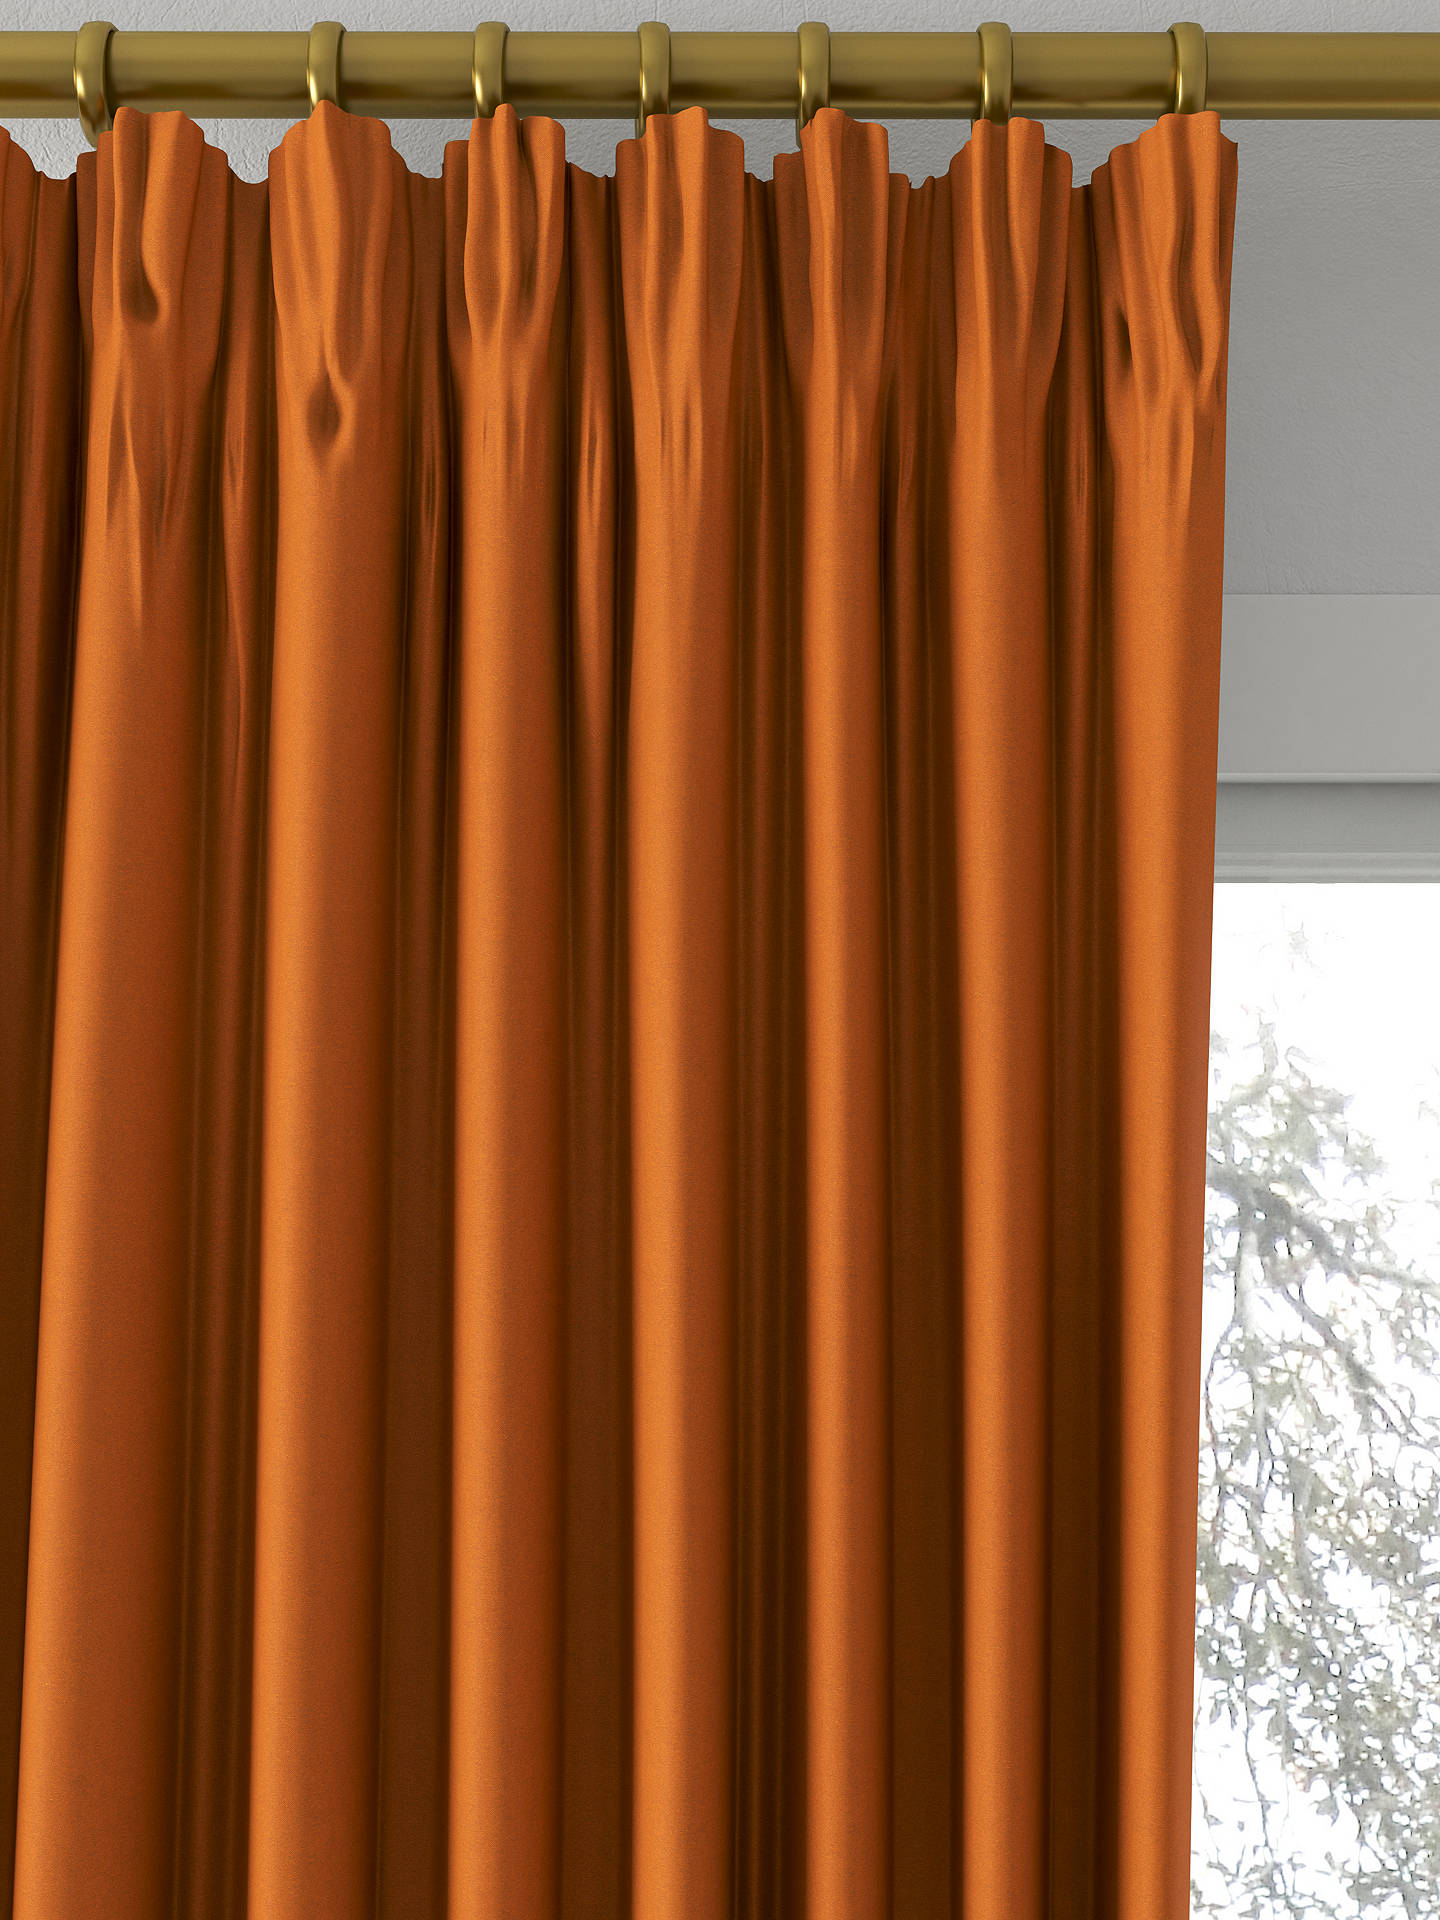 Harlequin Empower Plain Made to Measure Curtains, Cinnamon